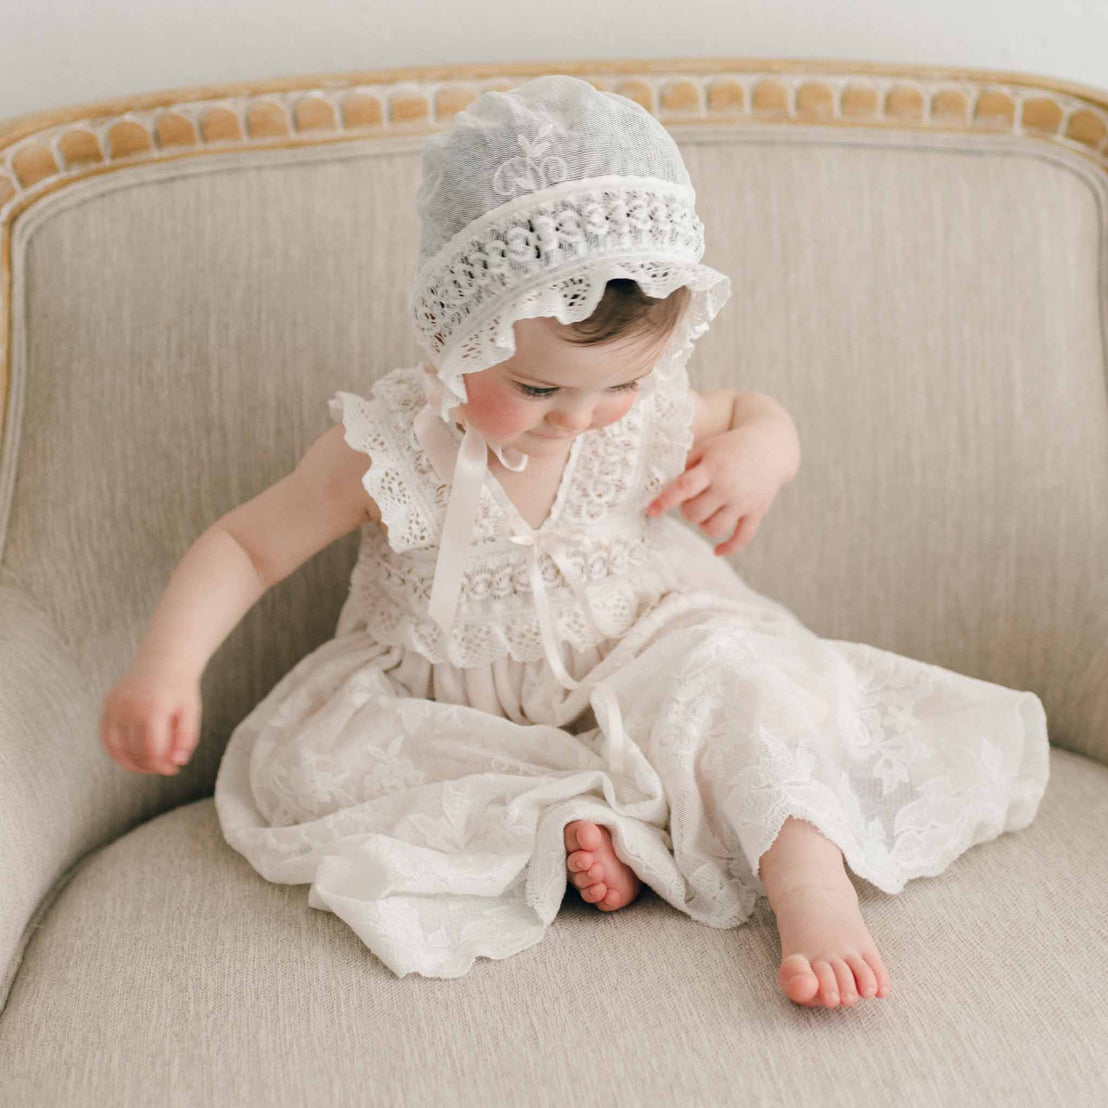 A toddler in a Charlotte Christening Gown & Bonnet sits on an elegant cream-colored chair, looking down thoughtfully. The background is a soft, beige and wood chair